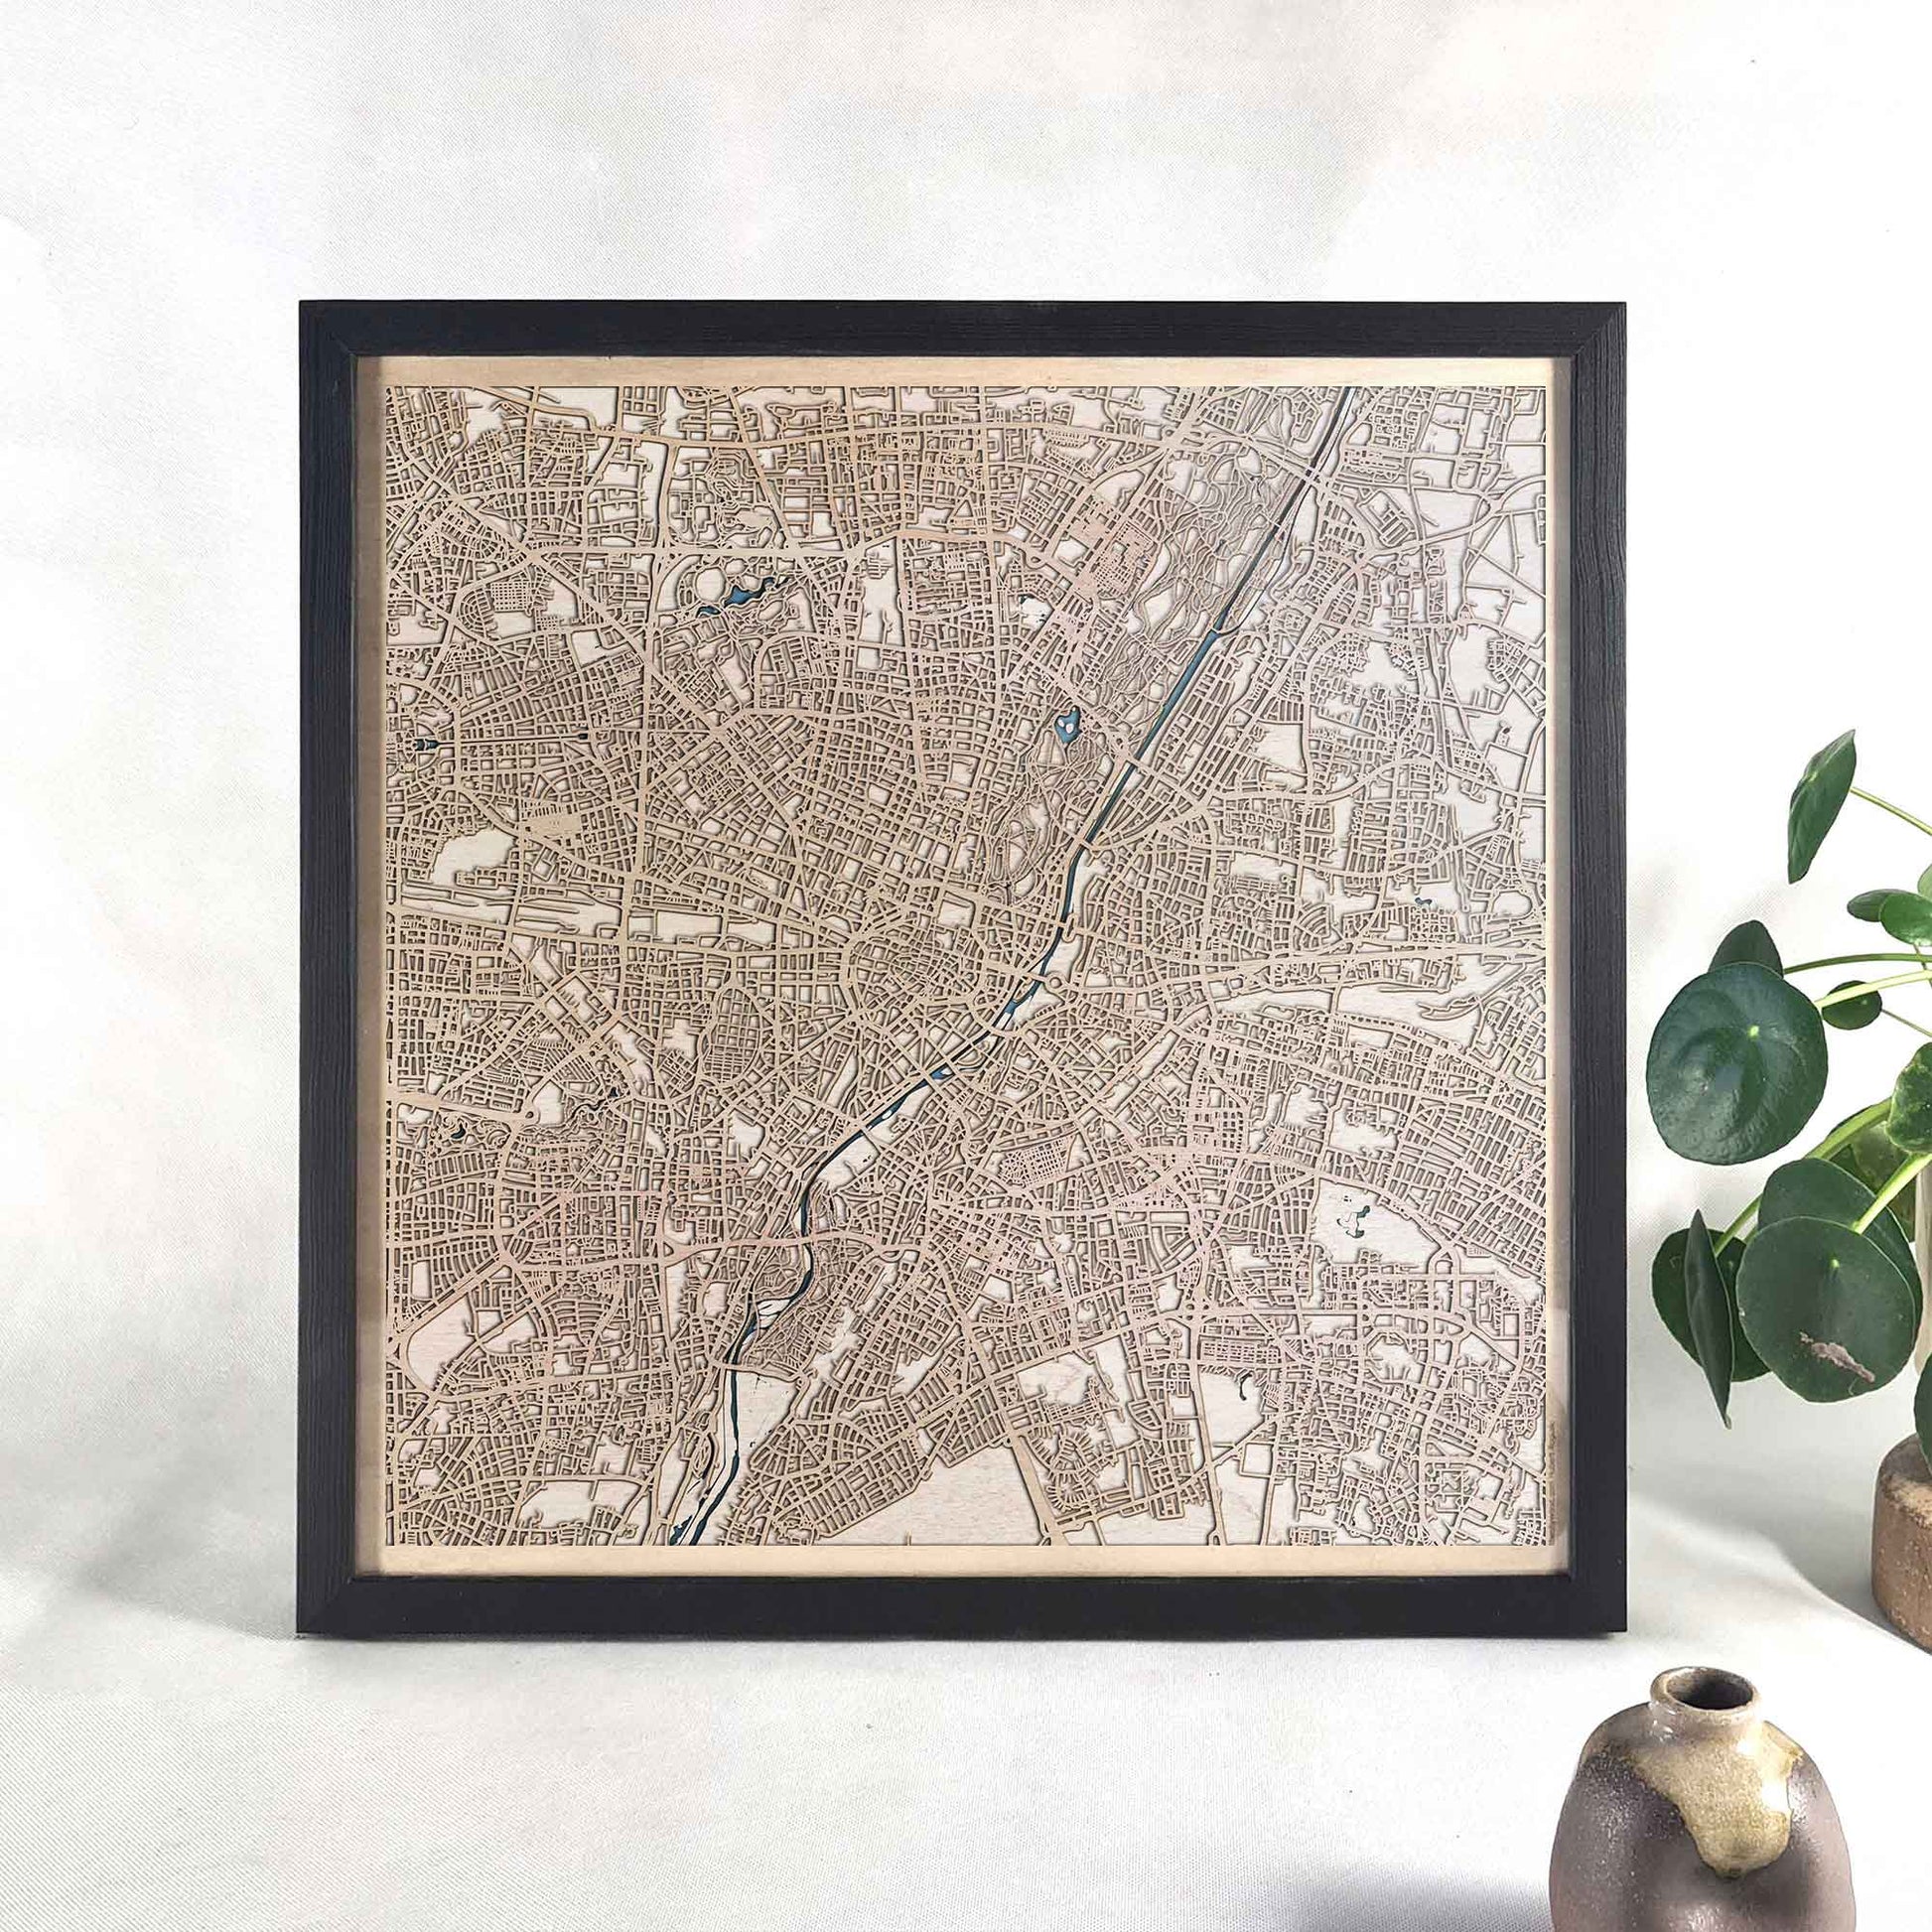 Munich Wooden Map by CityWood - Custom Wood Map Art - Unique Laser Cut Engraved - Anniversary Gift